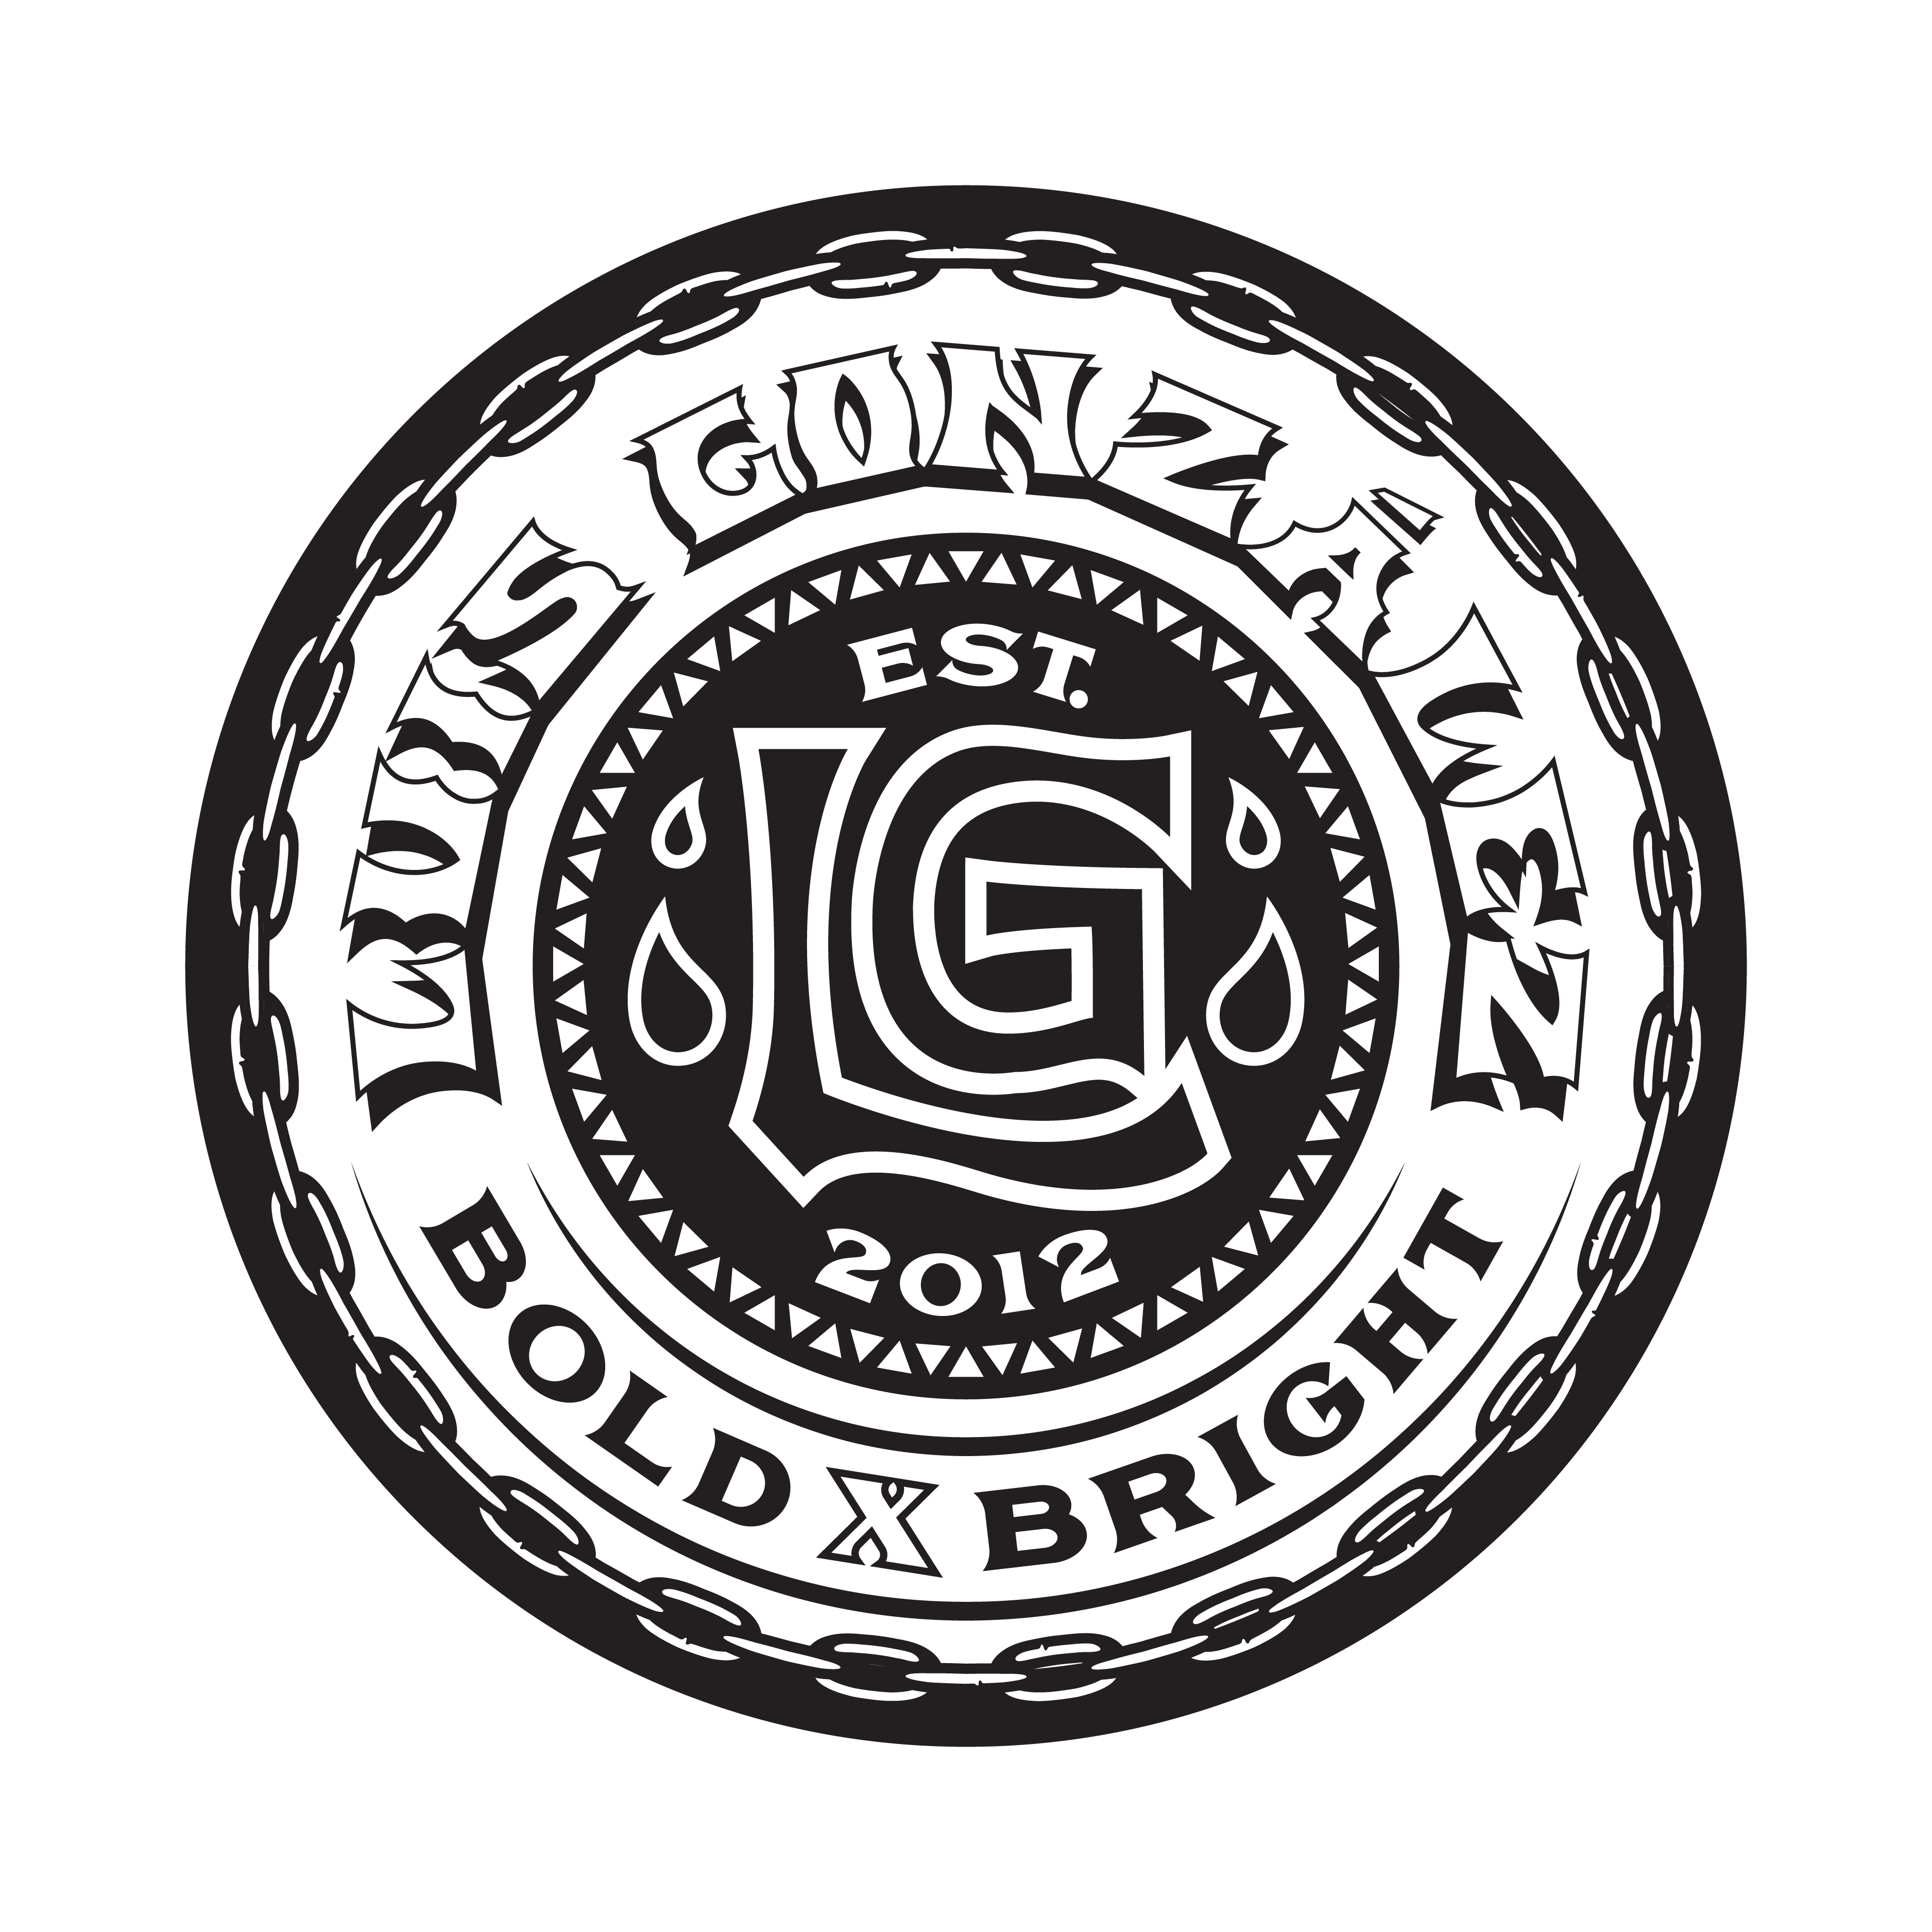 Luis Gonzalez badge logo design by logo designer Shapeshifter Creative Co. for your inspiration and for the worlds largest logo competition